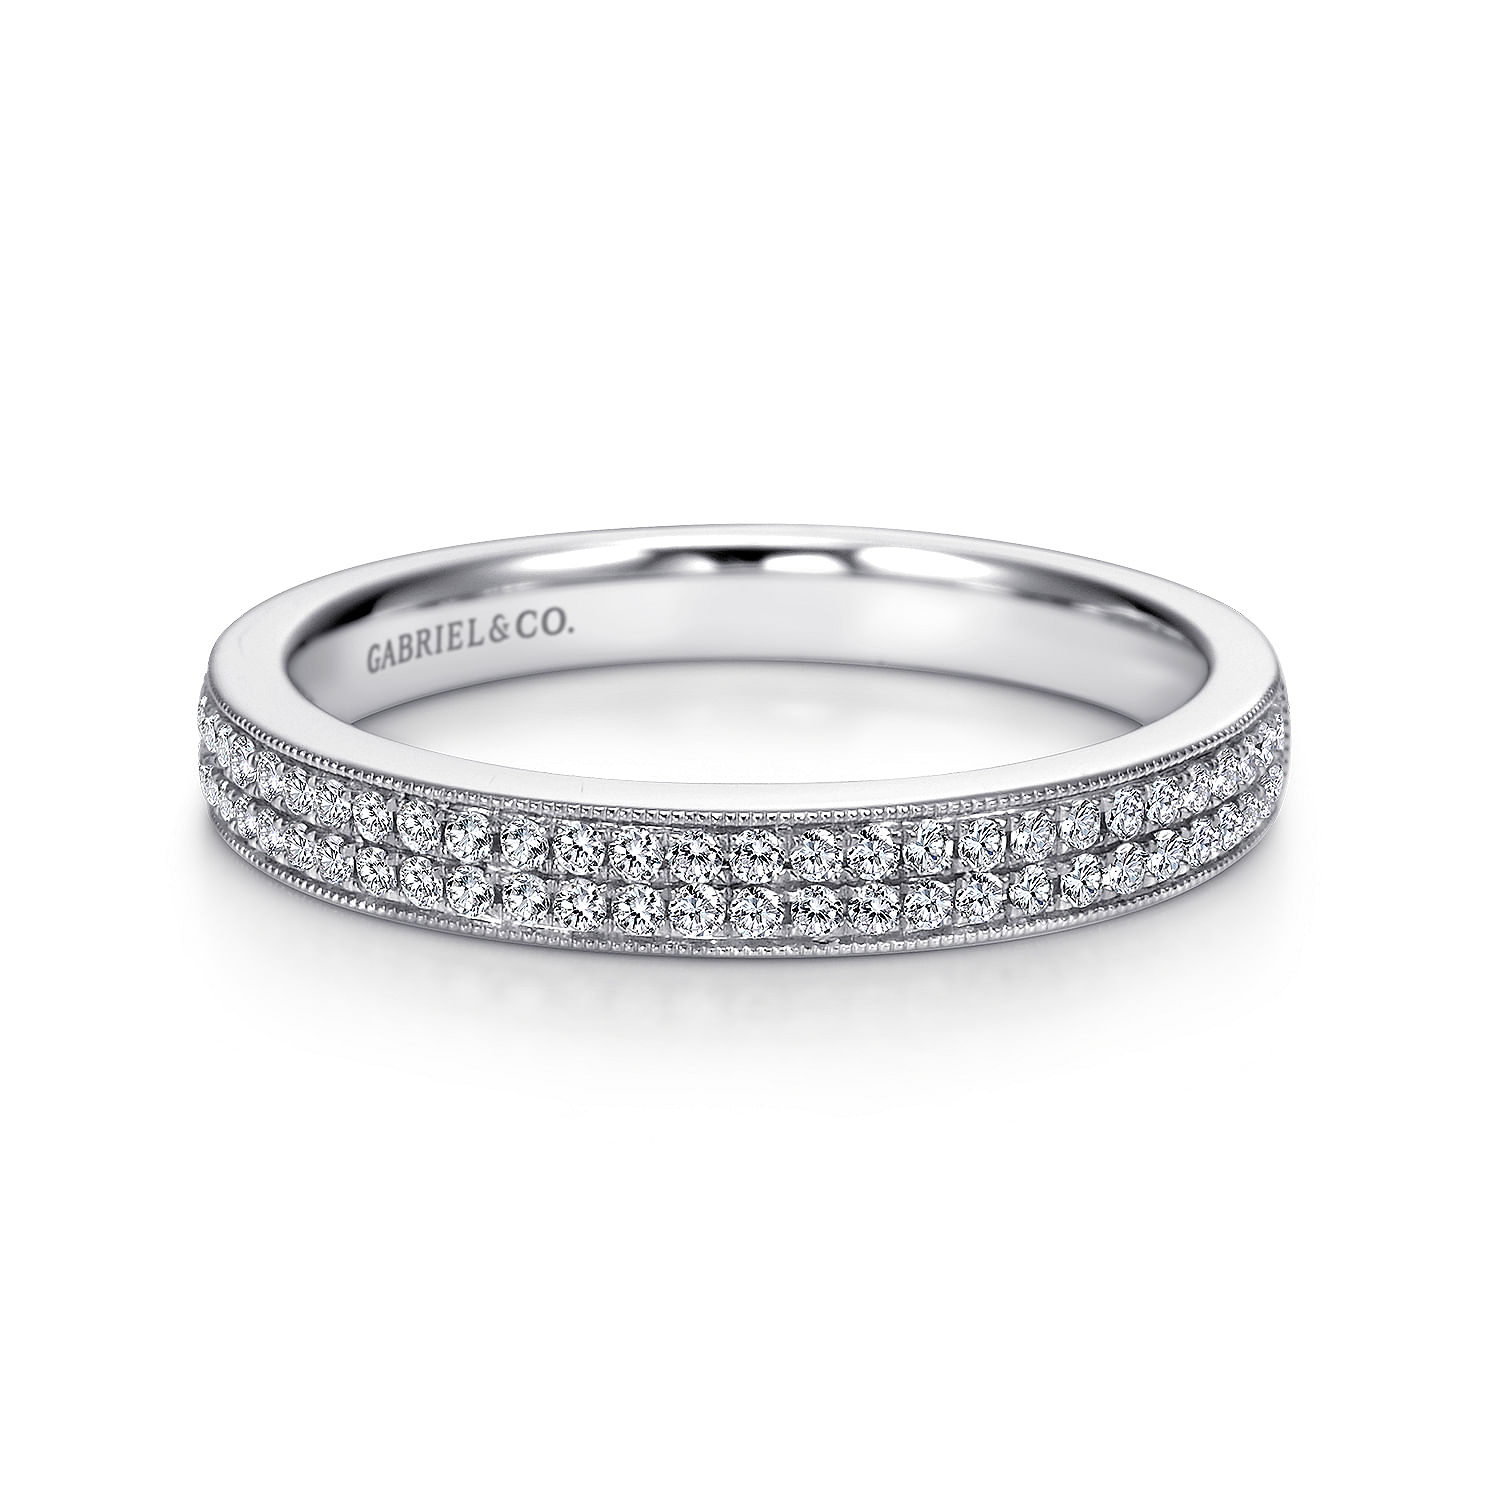 Parma - 14K White Gold Micro Pave Channel Diamond Anniversary Band with Millgrain